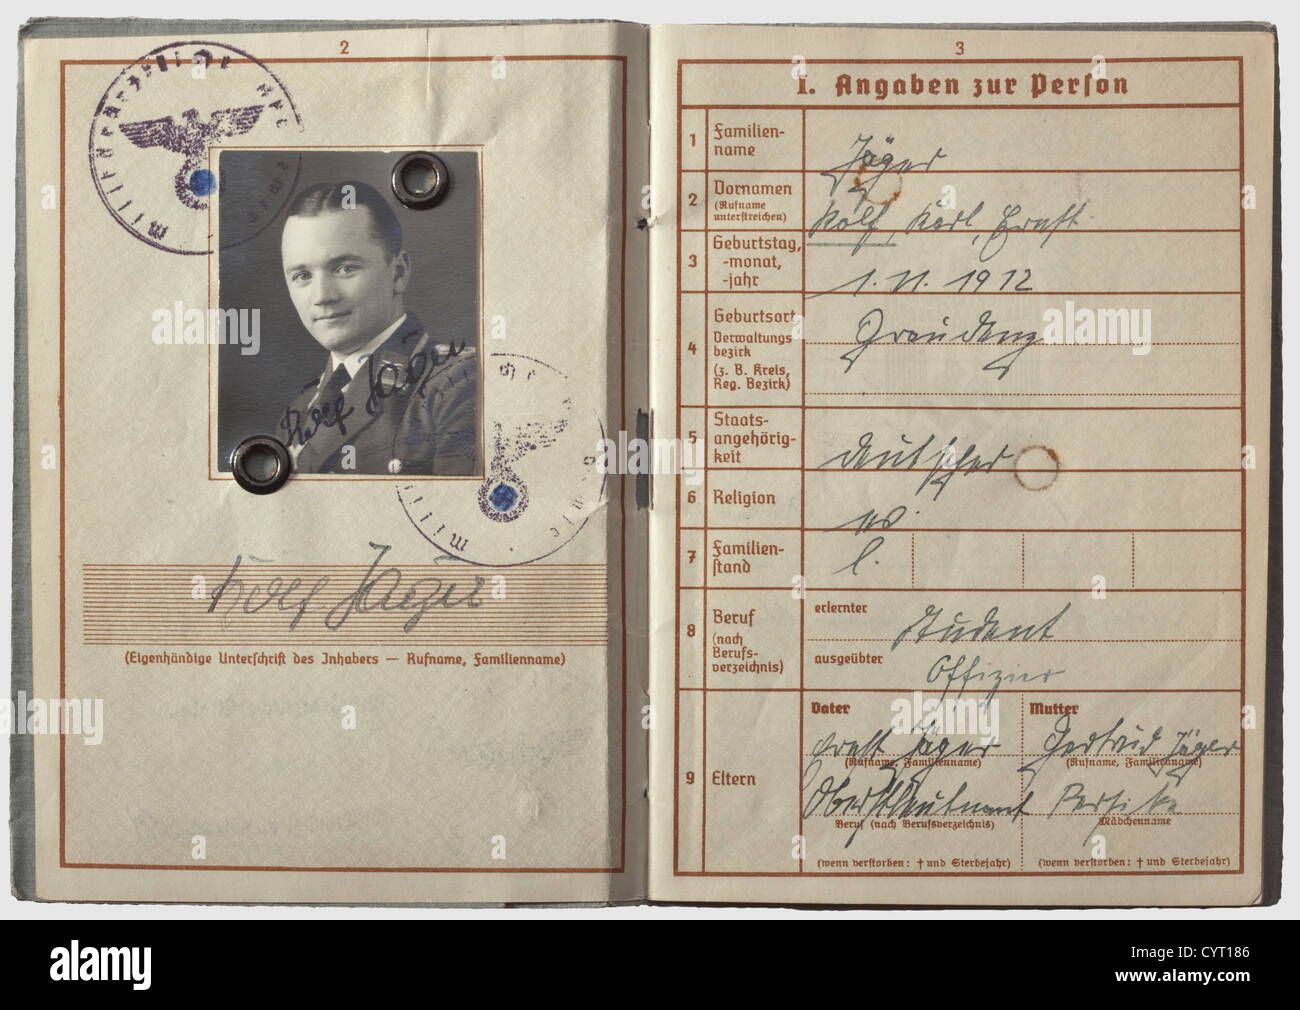 Knight's Cross winner Dr. Rolf Jäger (1912 - 1984), a paratrooper's Wehrpass (service book) Issued on 22 December 1937, continued until 1 May 1946. On the second page is a photo of Jäger in uniform, pages 12 and 13 with entries for service locations and unit assignments (examples: Sturmabteilung Koch, I./Sturm-Regiment 1, 15, Fallsch. Jg. Ausb. Rgt. 1, Fallschirm-Kriegslazarett, 46. Brit. Inf. Div ! (7 Nov 1945 - 1 June 1946). Complete entries for all training courses, as a Fallschirmschützenlehrgang (Paratrooper training) 1940. Awards entries: Paratroop Badge,, Stock Photo